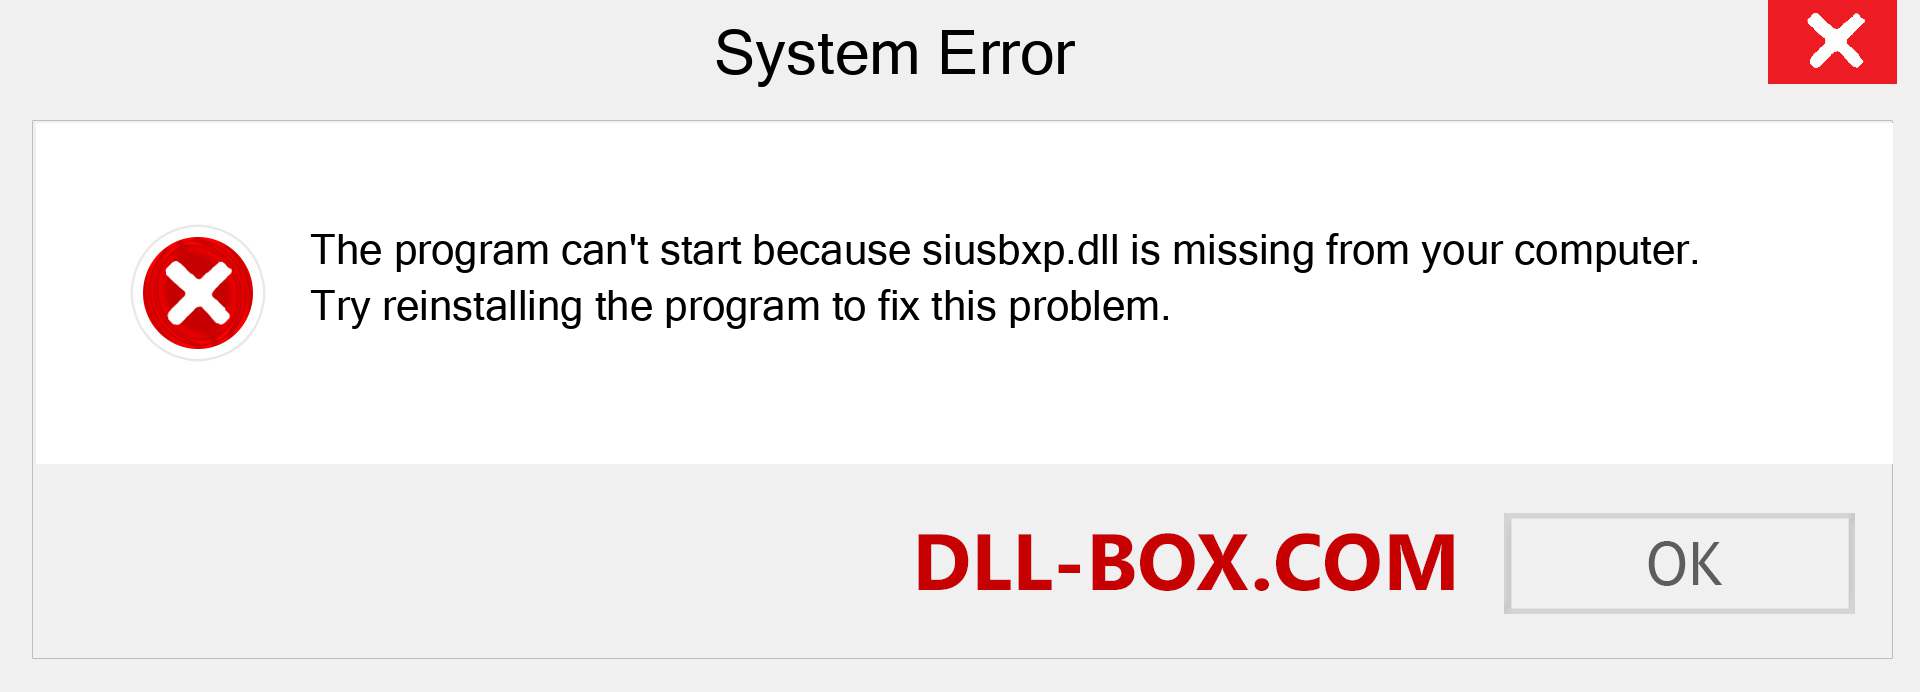  siusbxp.dll file is missing?. Download for Windows 7, 8, 10 - Fix  siusbxp dll Missing Error on Windows, photos, images